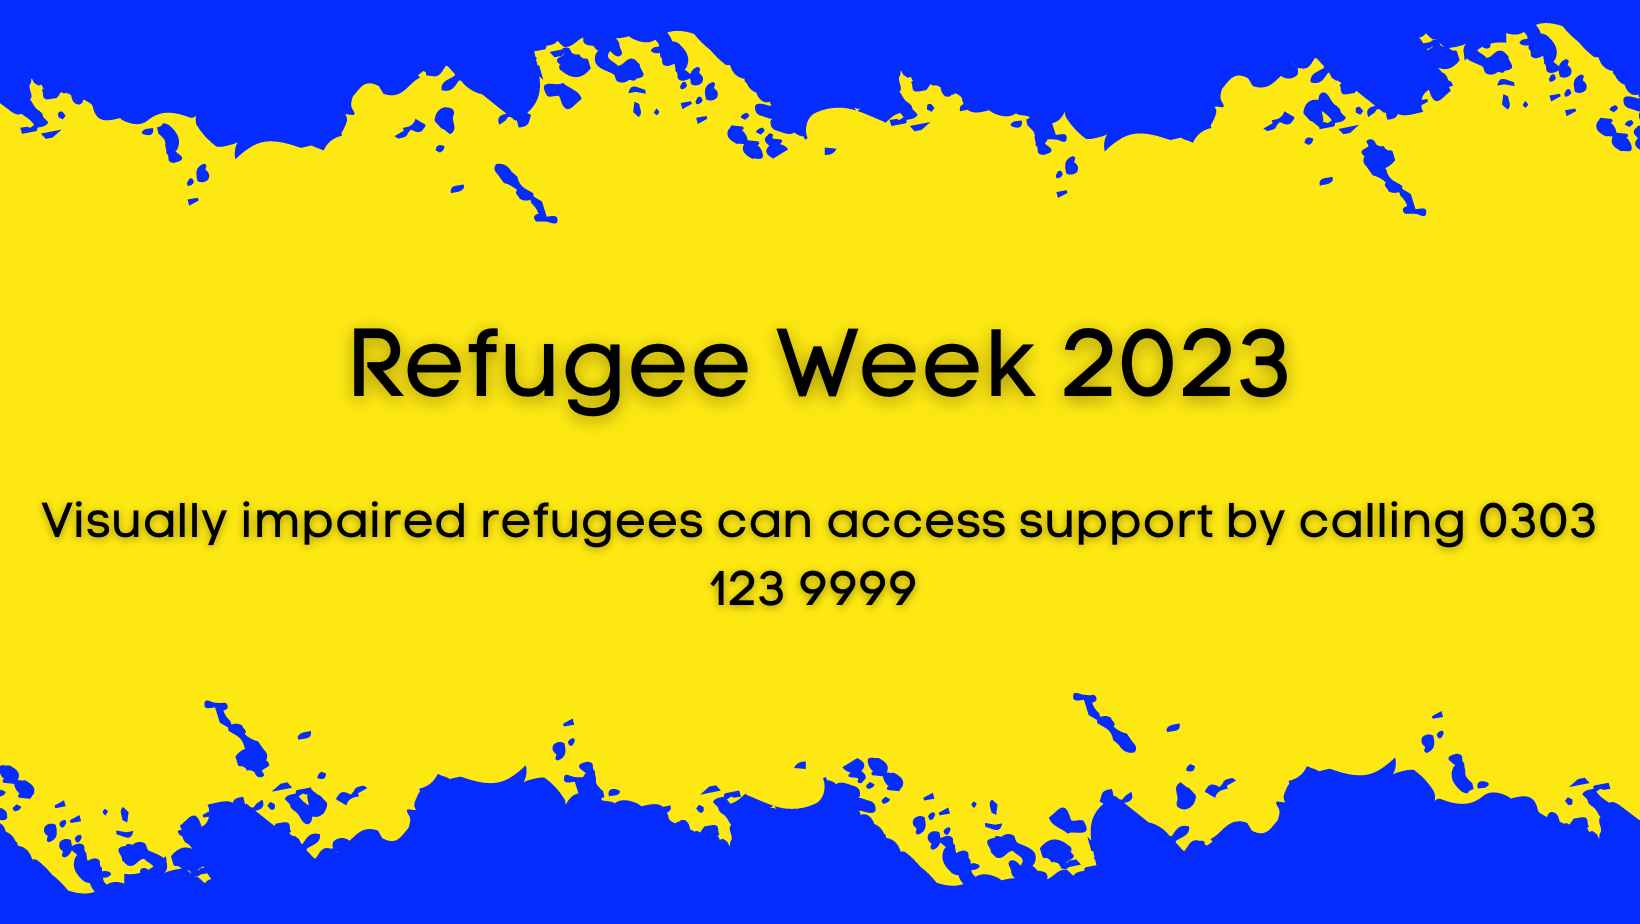 A poster that says 'Refugee week 2023: Visually impaired refugees can access support by calling 0303 123 9999